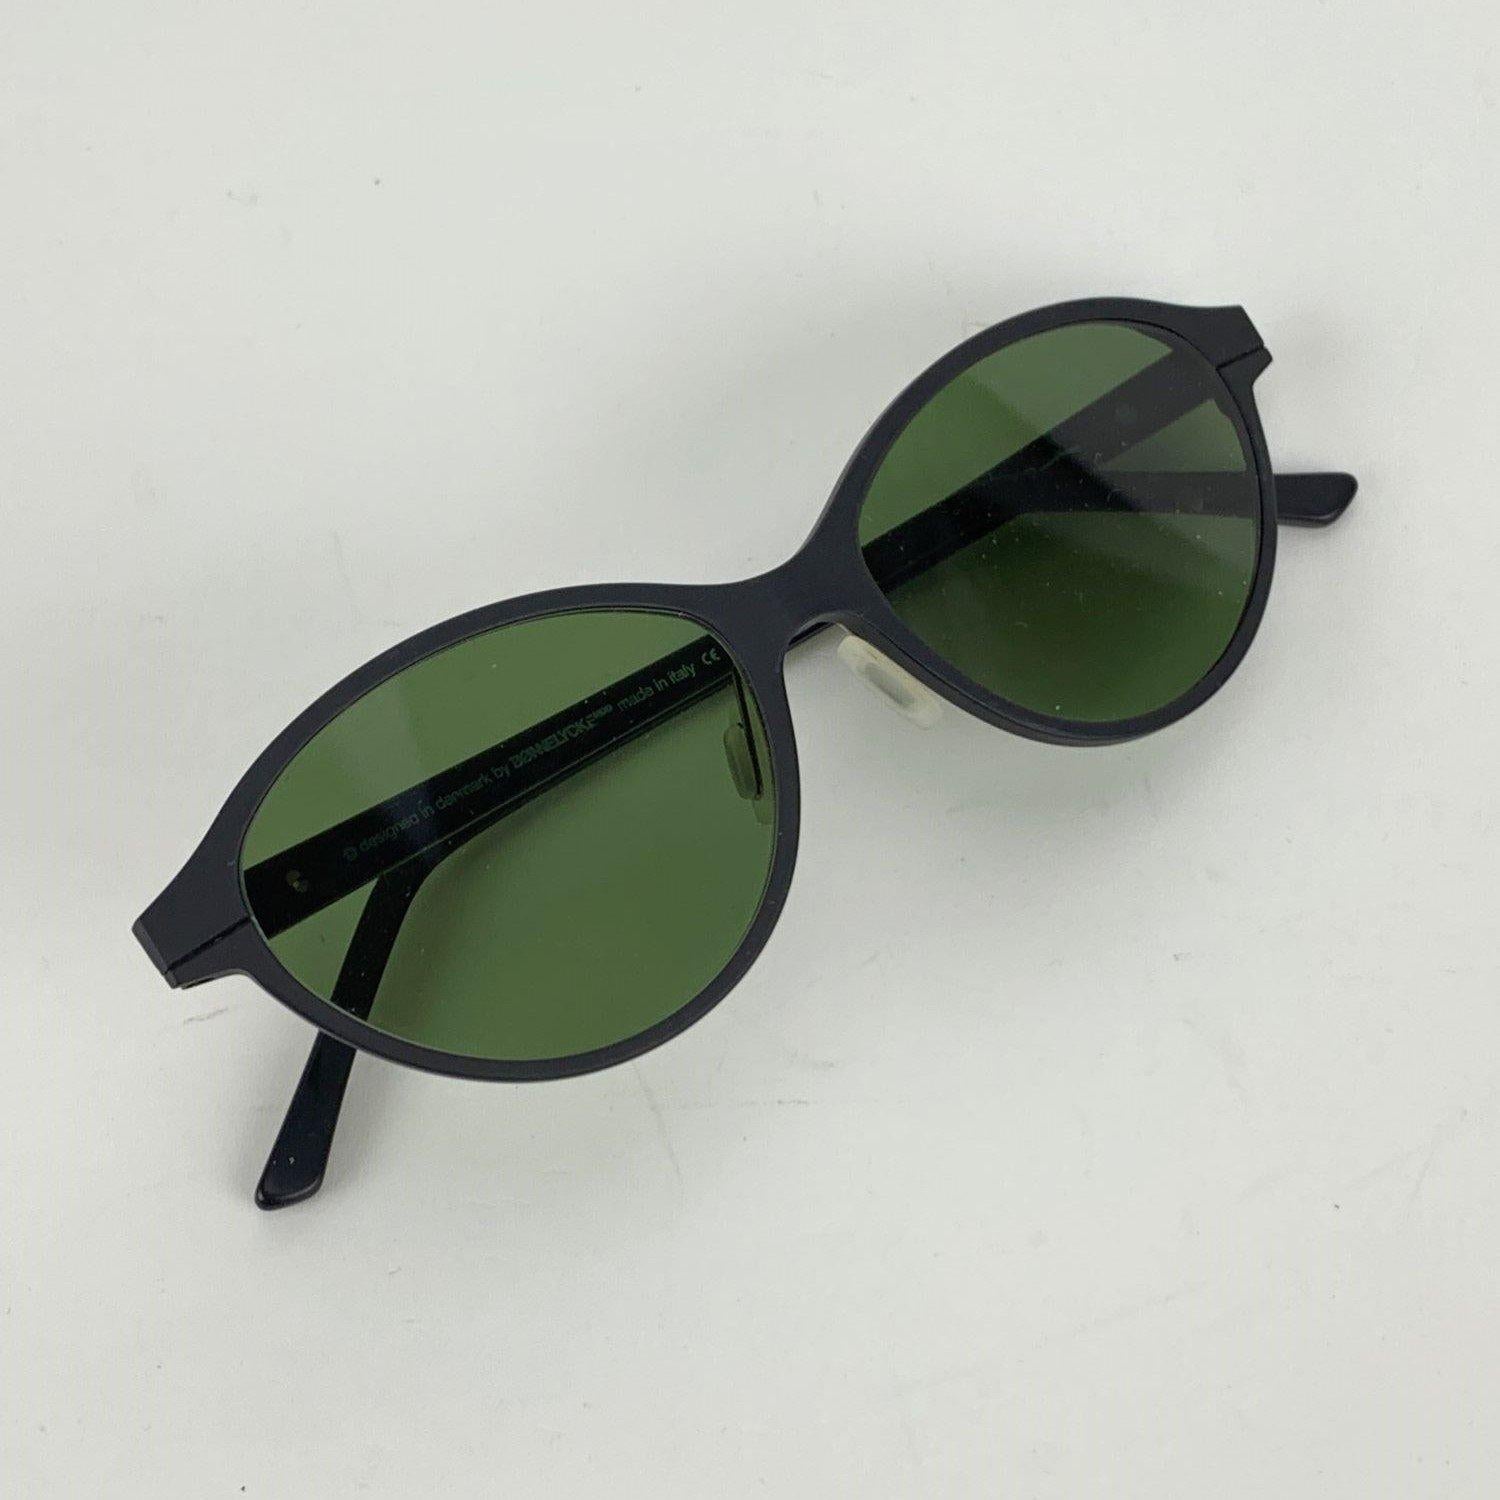 Kilsgaard by Bonnelycke Mdd Black Sunglasses Model 30 53/15 145 mm In New Condition For Sale In Rome, Rome